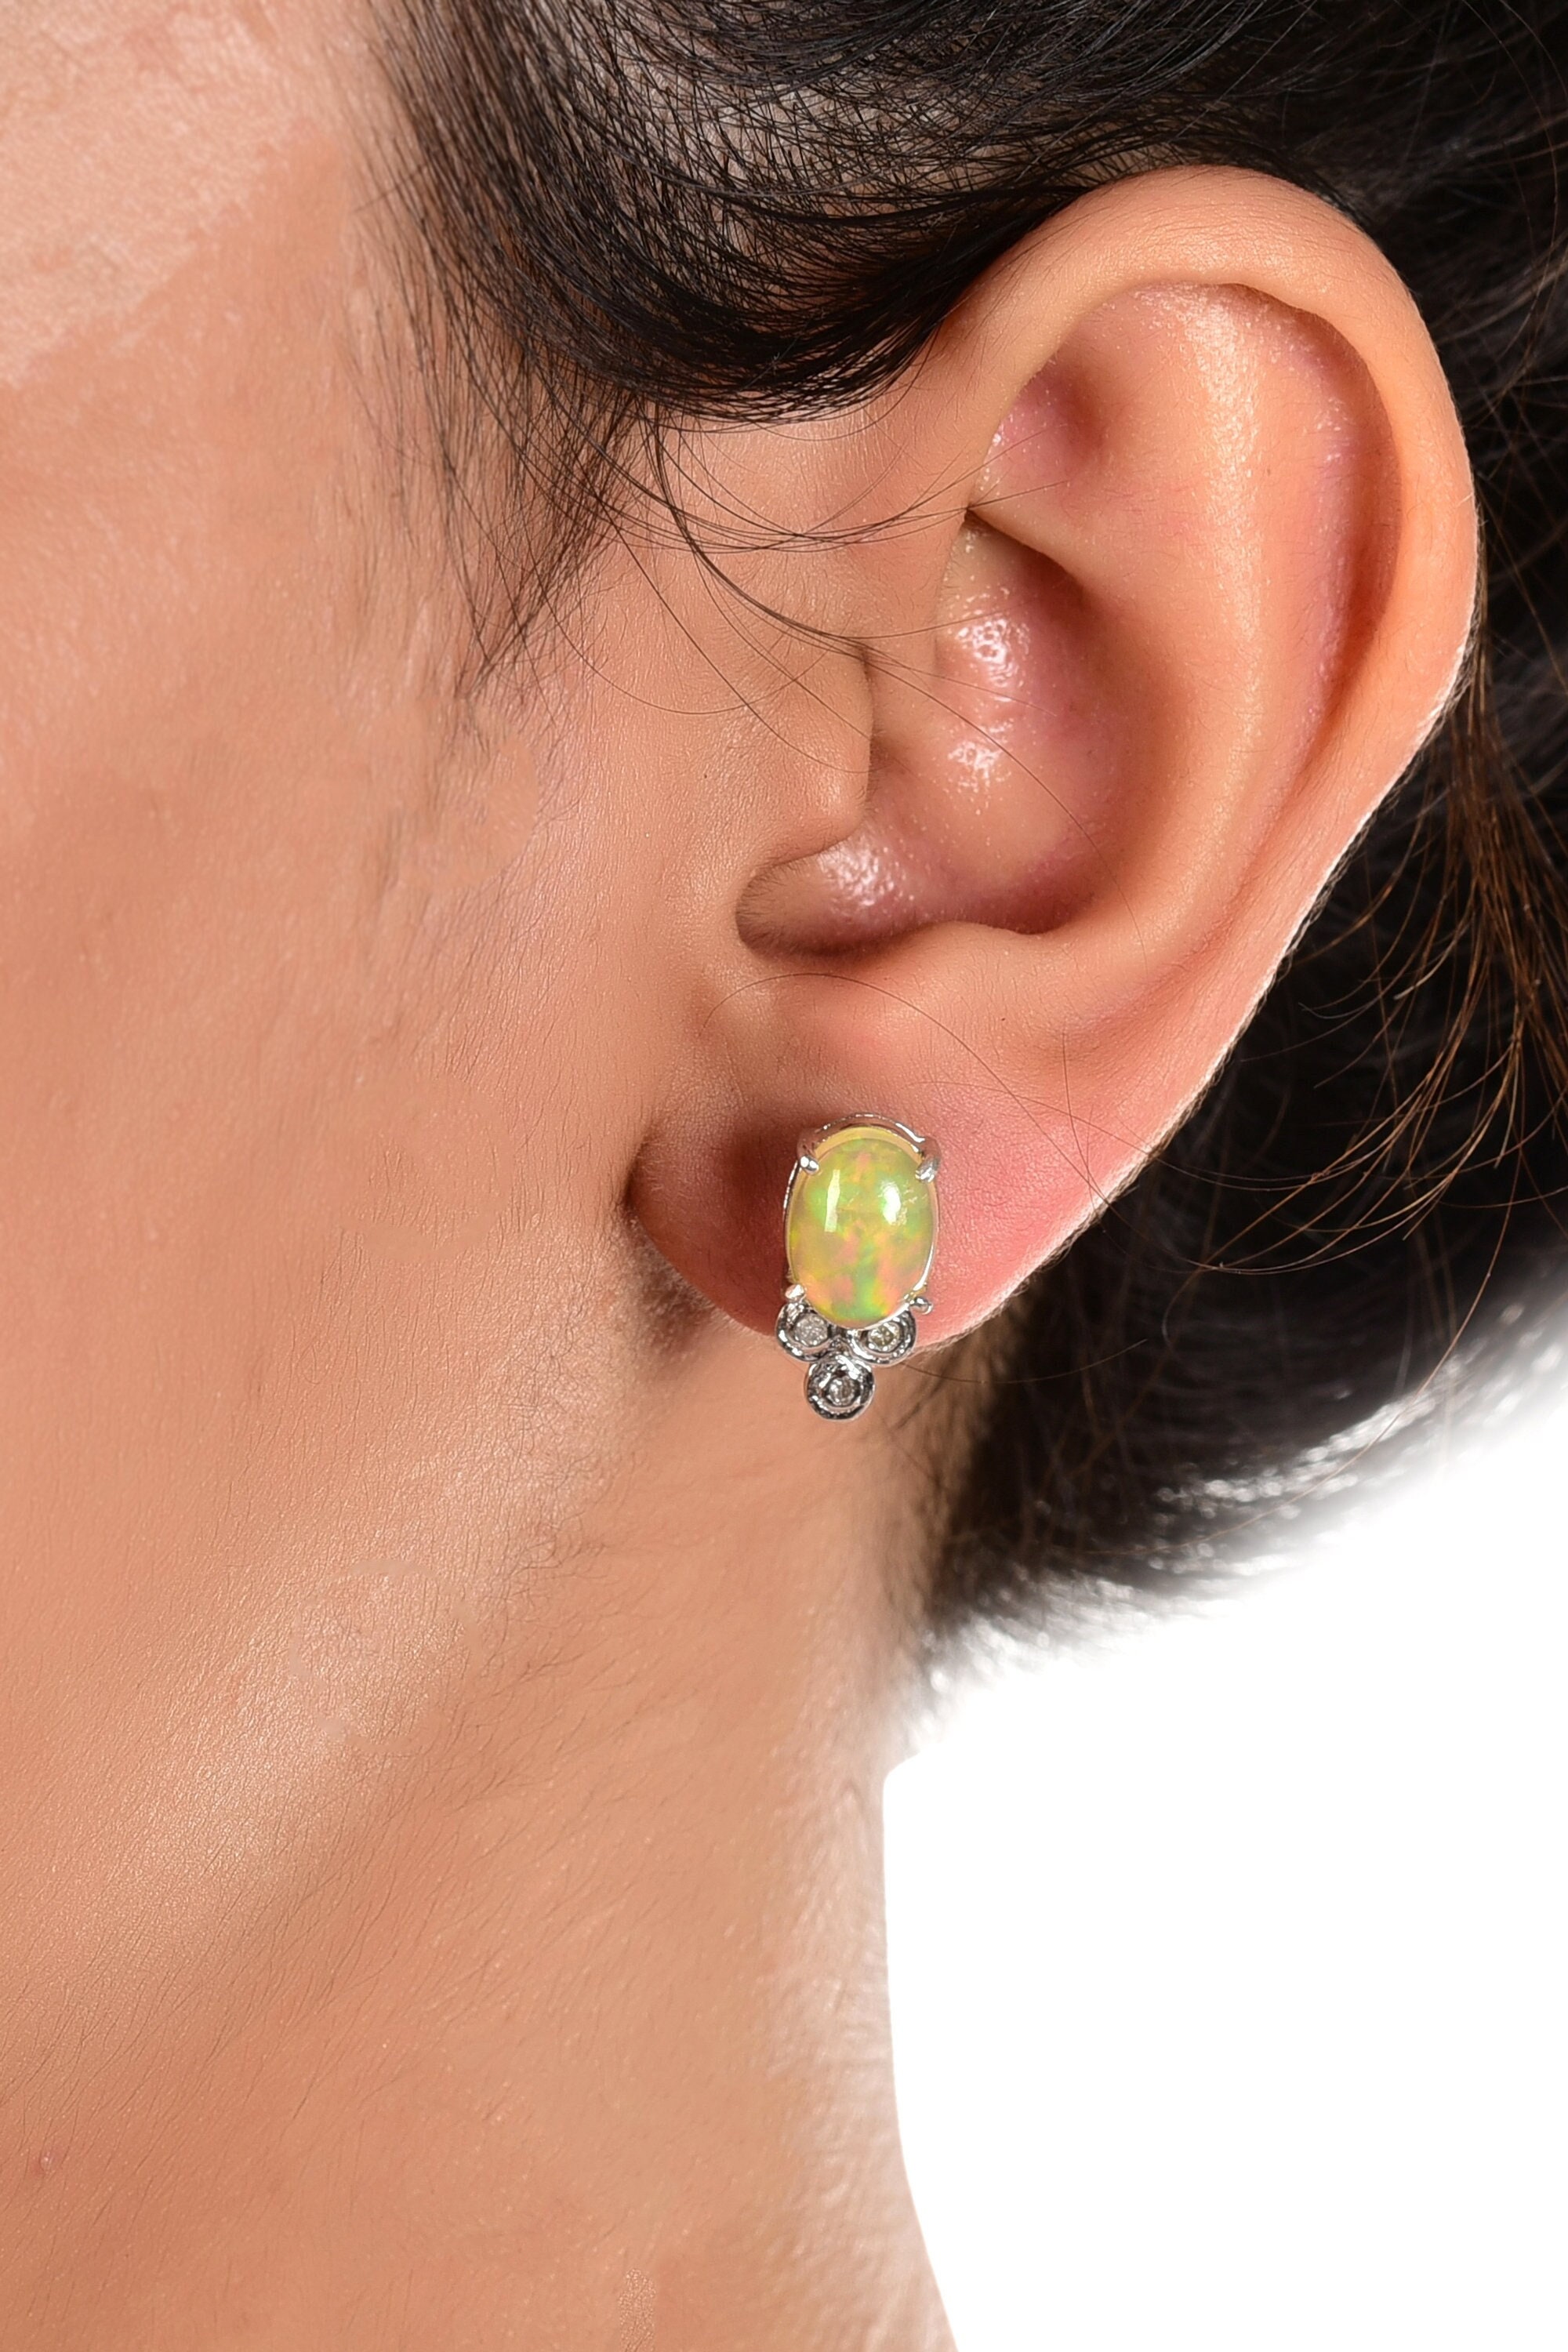 Opal Earrings 18k Yellow Gold Faceted Opal Studs 094 Carat Certified Opal  Real Genuine Natural Opal Jewelry 6mm Round Cut Great Fire